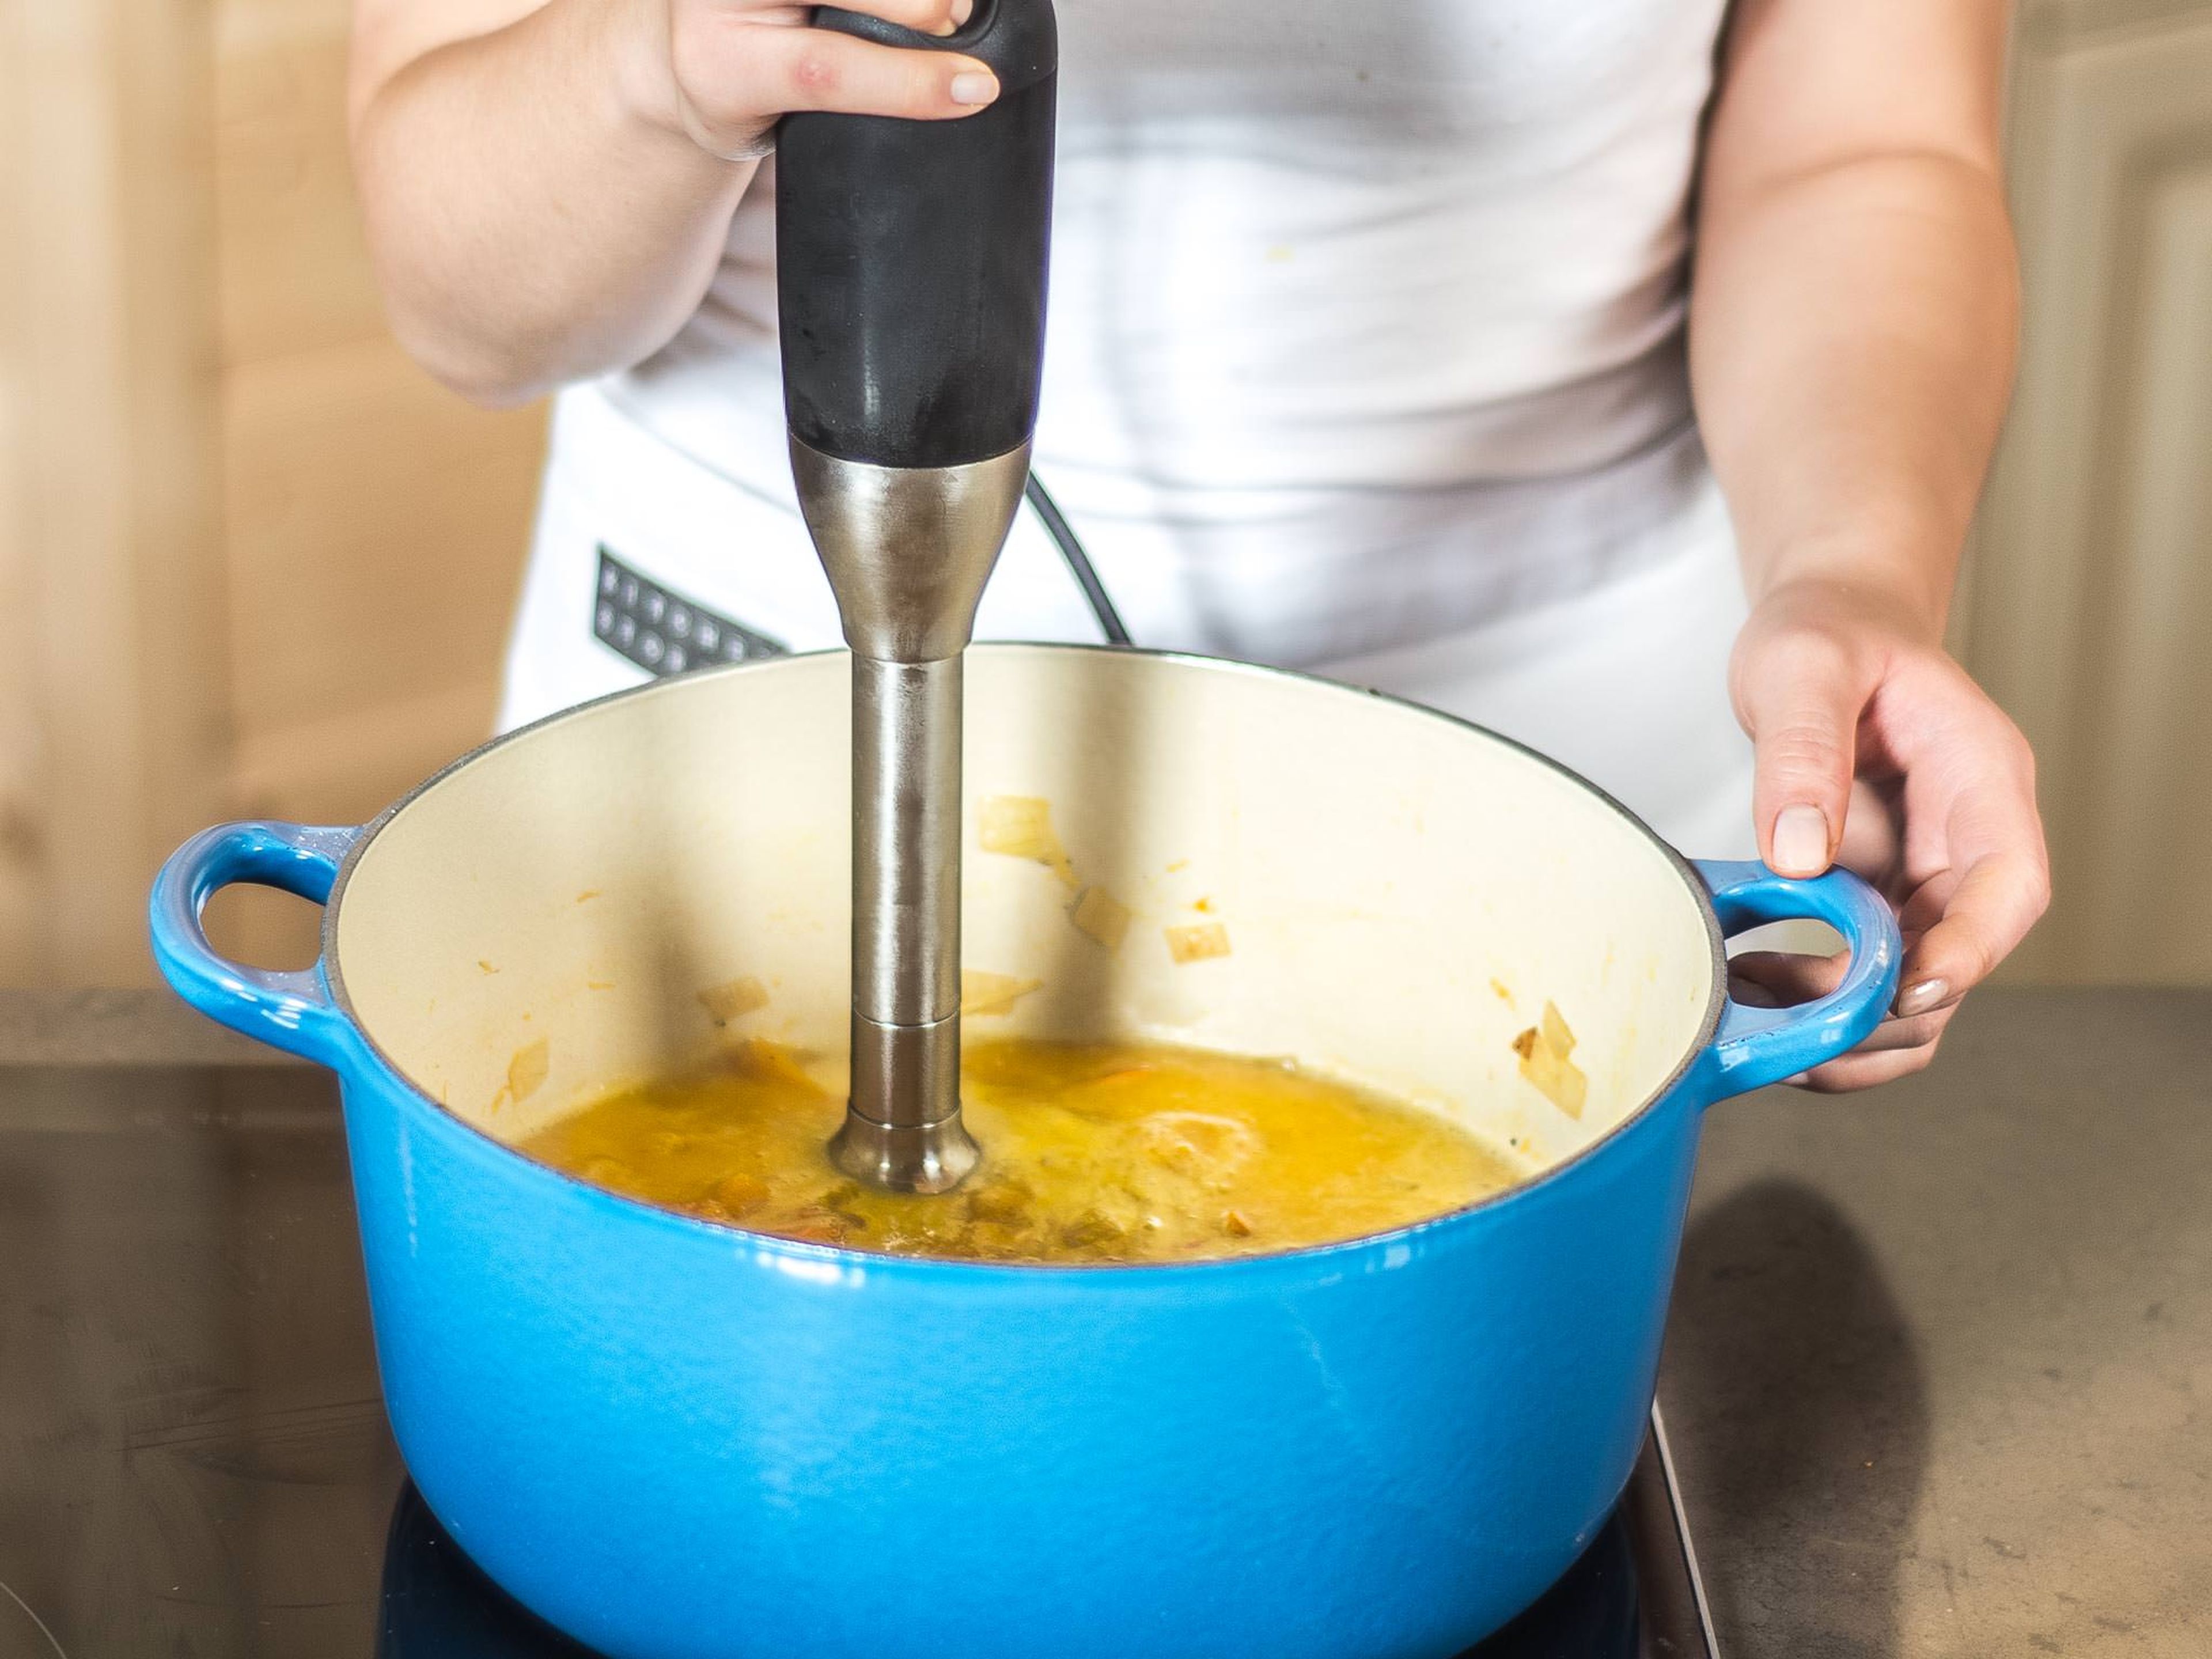 Remove the saucepan from the heat and puree the soup with a hand blender. To serve, fill a deep dish and garnish the soup with the candied pumpkin seeds and a few drops of pumpkin seed oil.